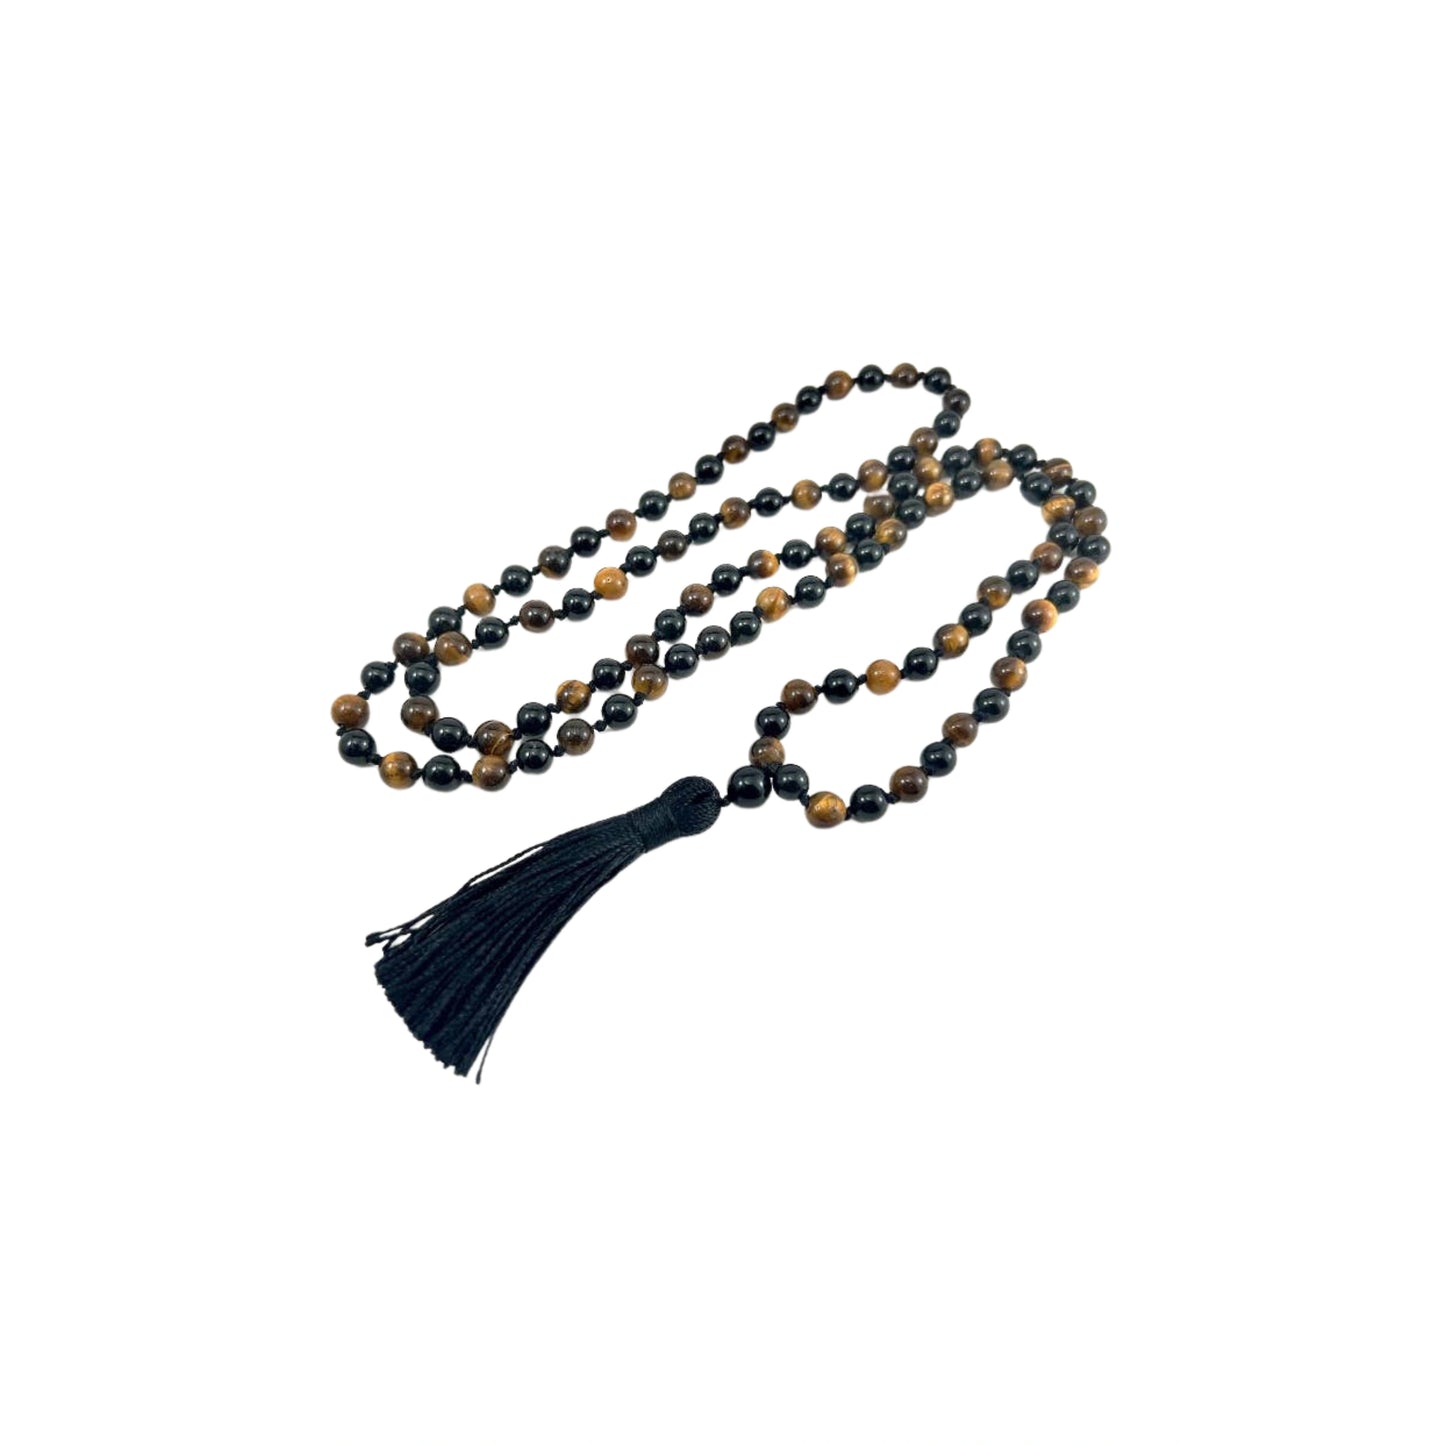 Tiger's Eye & Black Obsidian Knotted 108 Bead Mala - 8mm (1 Pack)